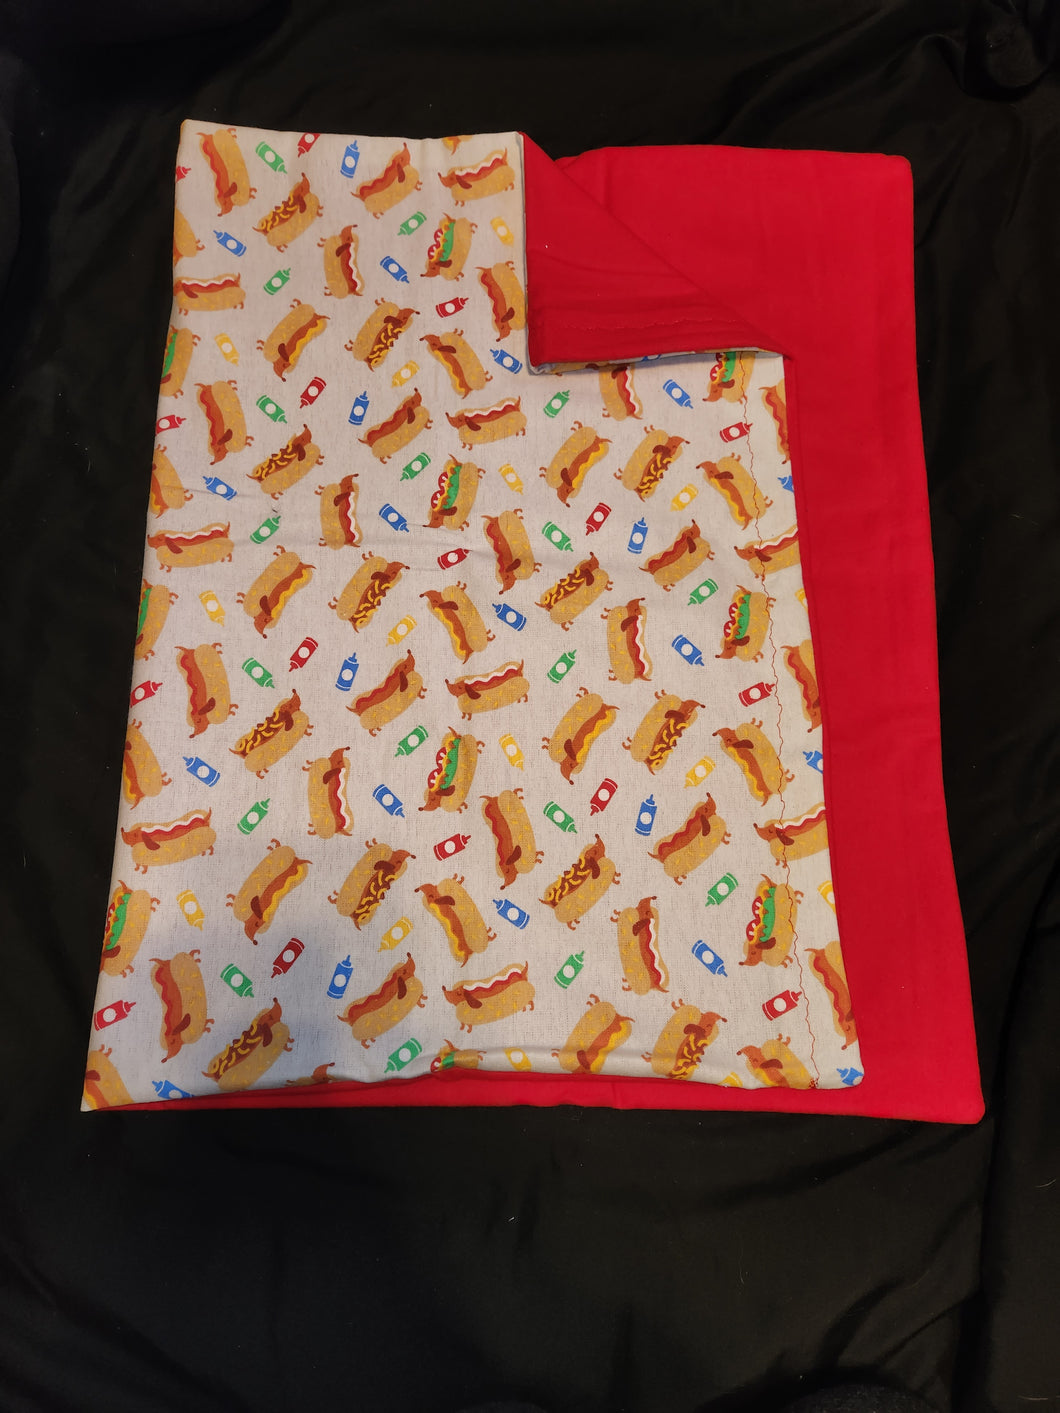 Pillowcase - Weiner Dogs with Condiments on Light Grey Flannel::Red Flannel